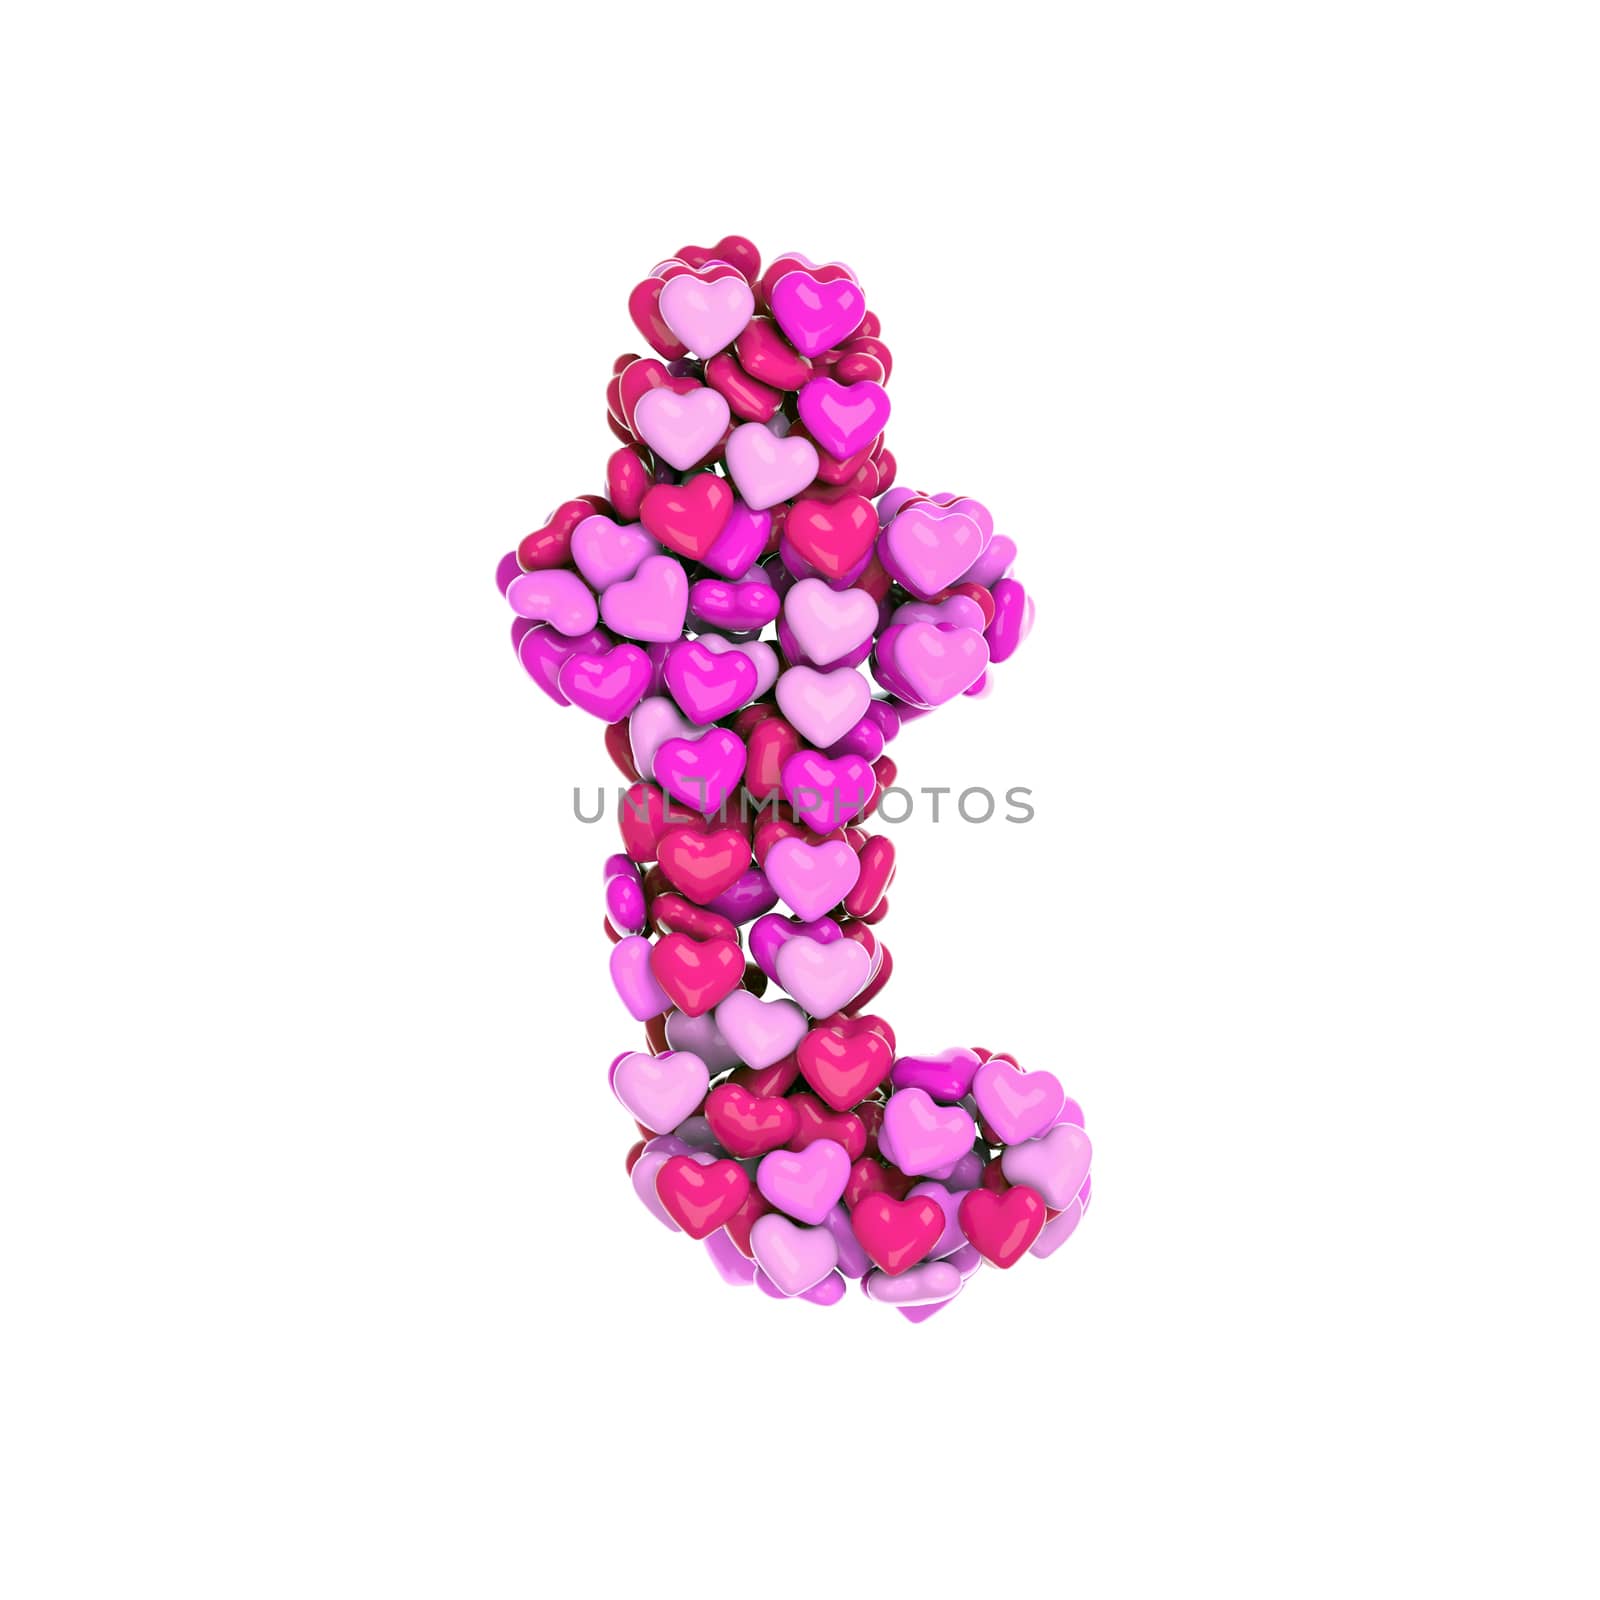 Valentine letter T - Lower-case 3d pink hearts font - Love, passion or wedding concept by chrisroll